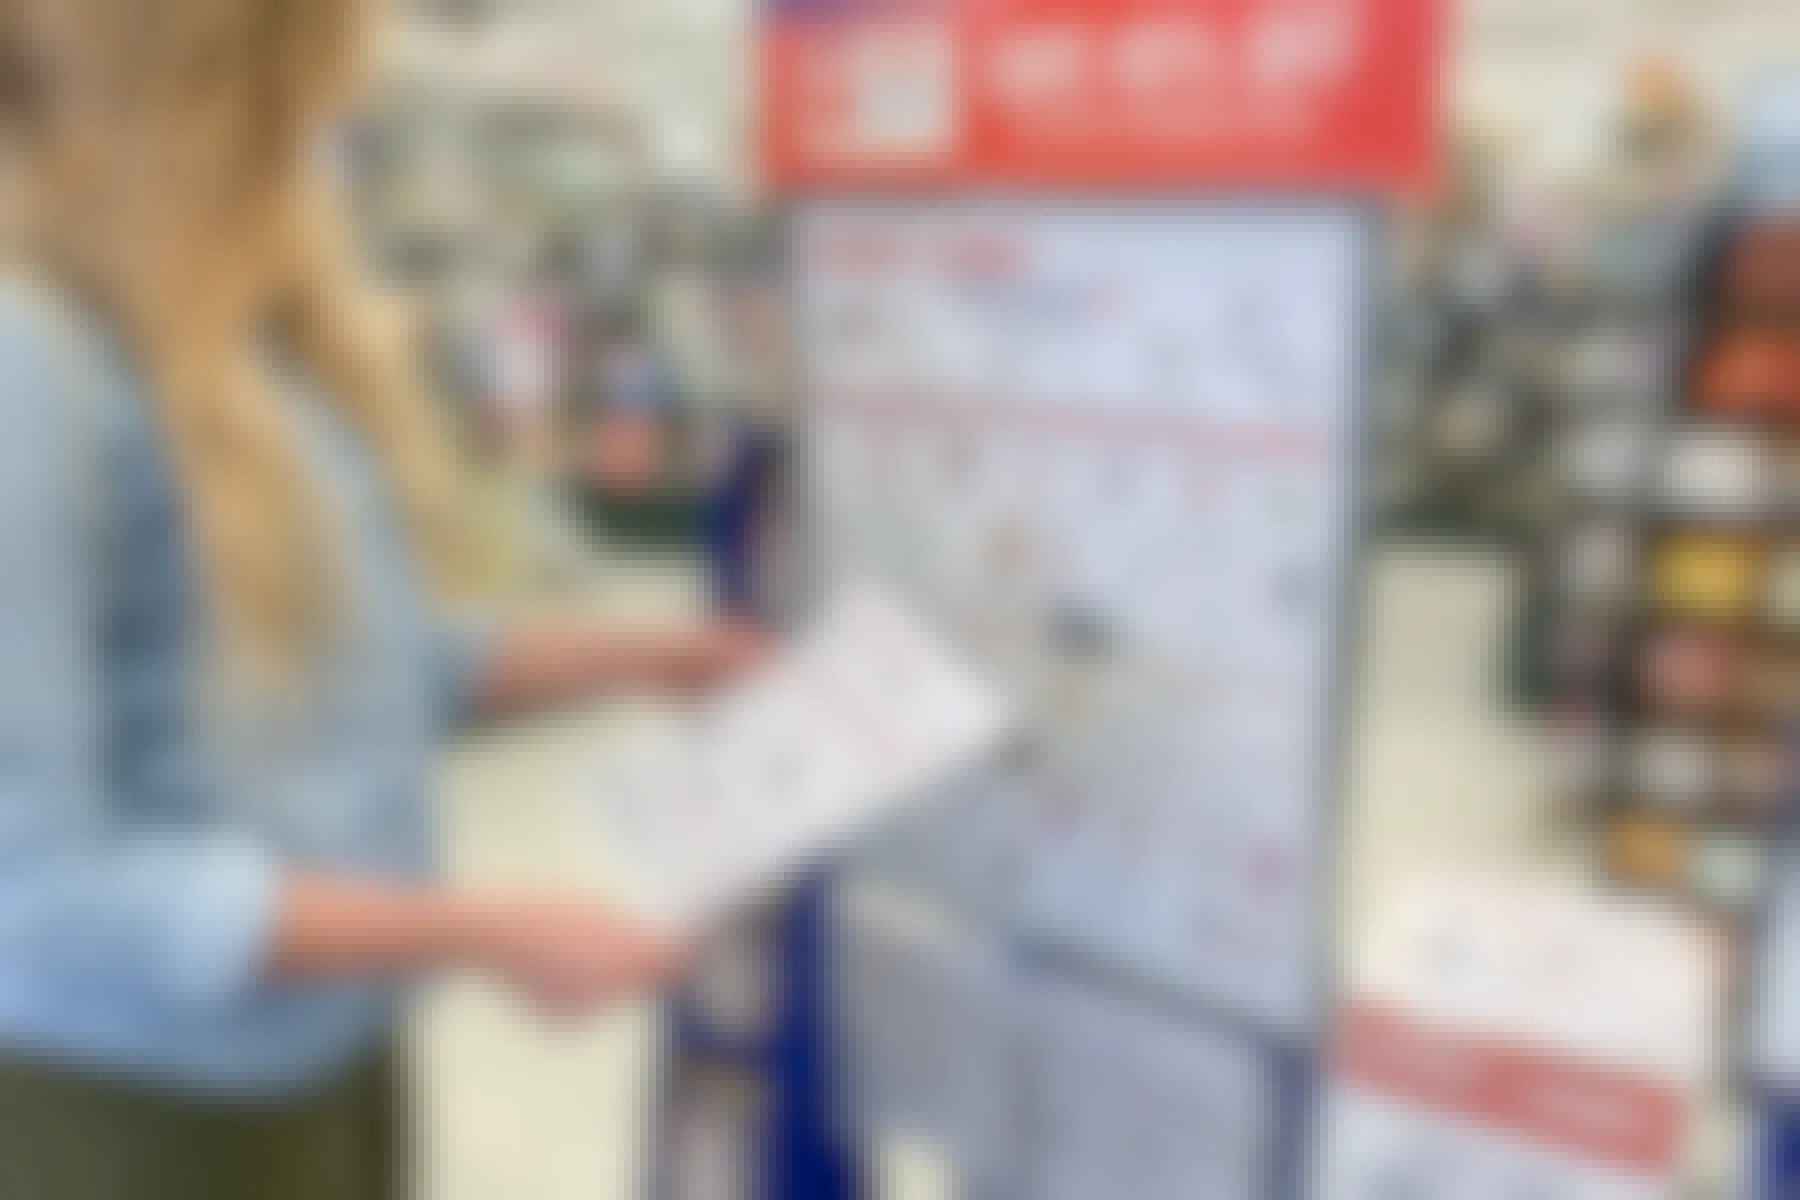 A woman looking at the sales schedule flyer.